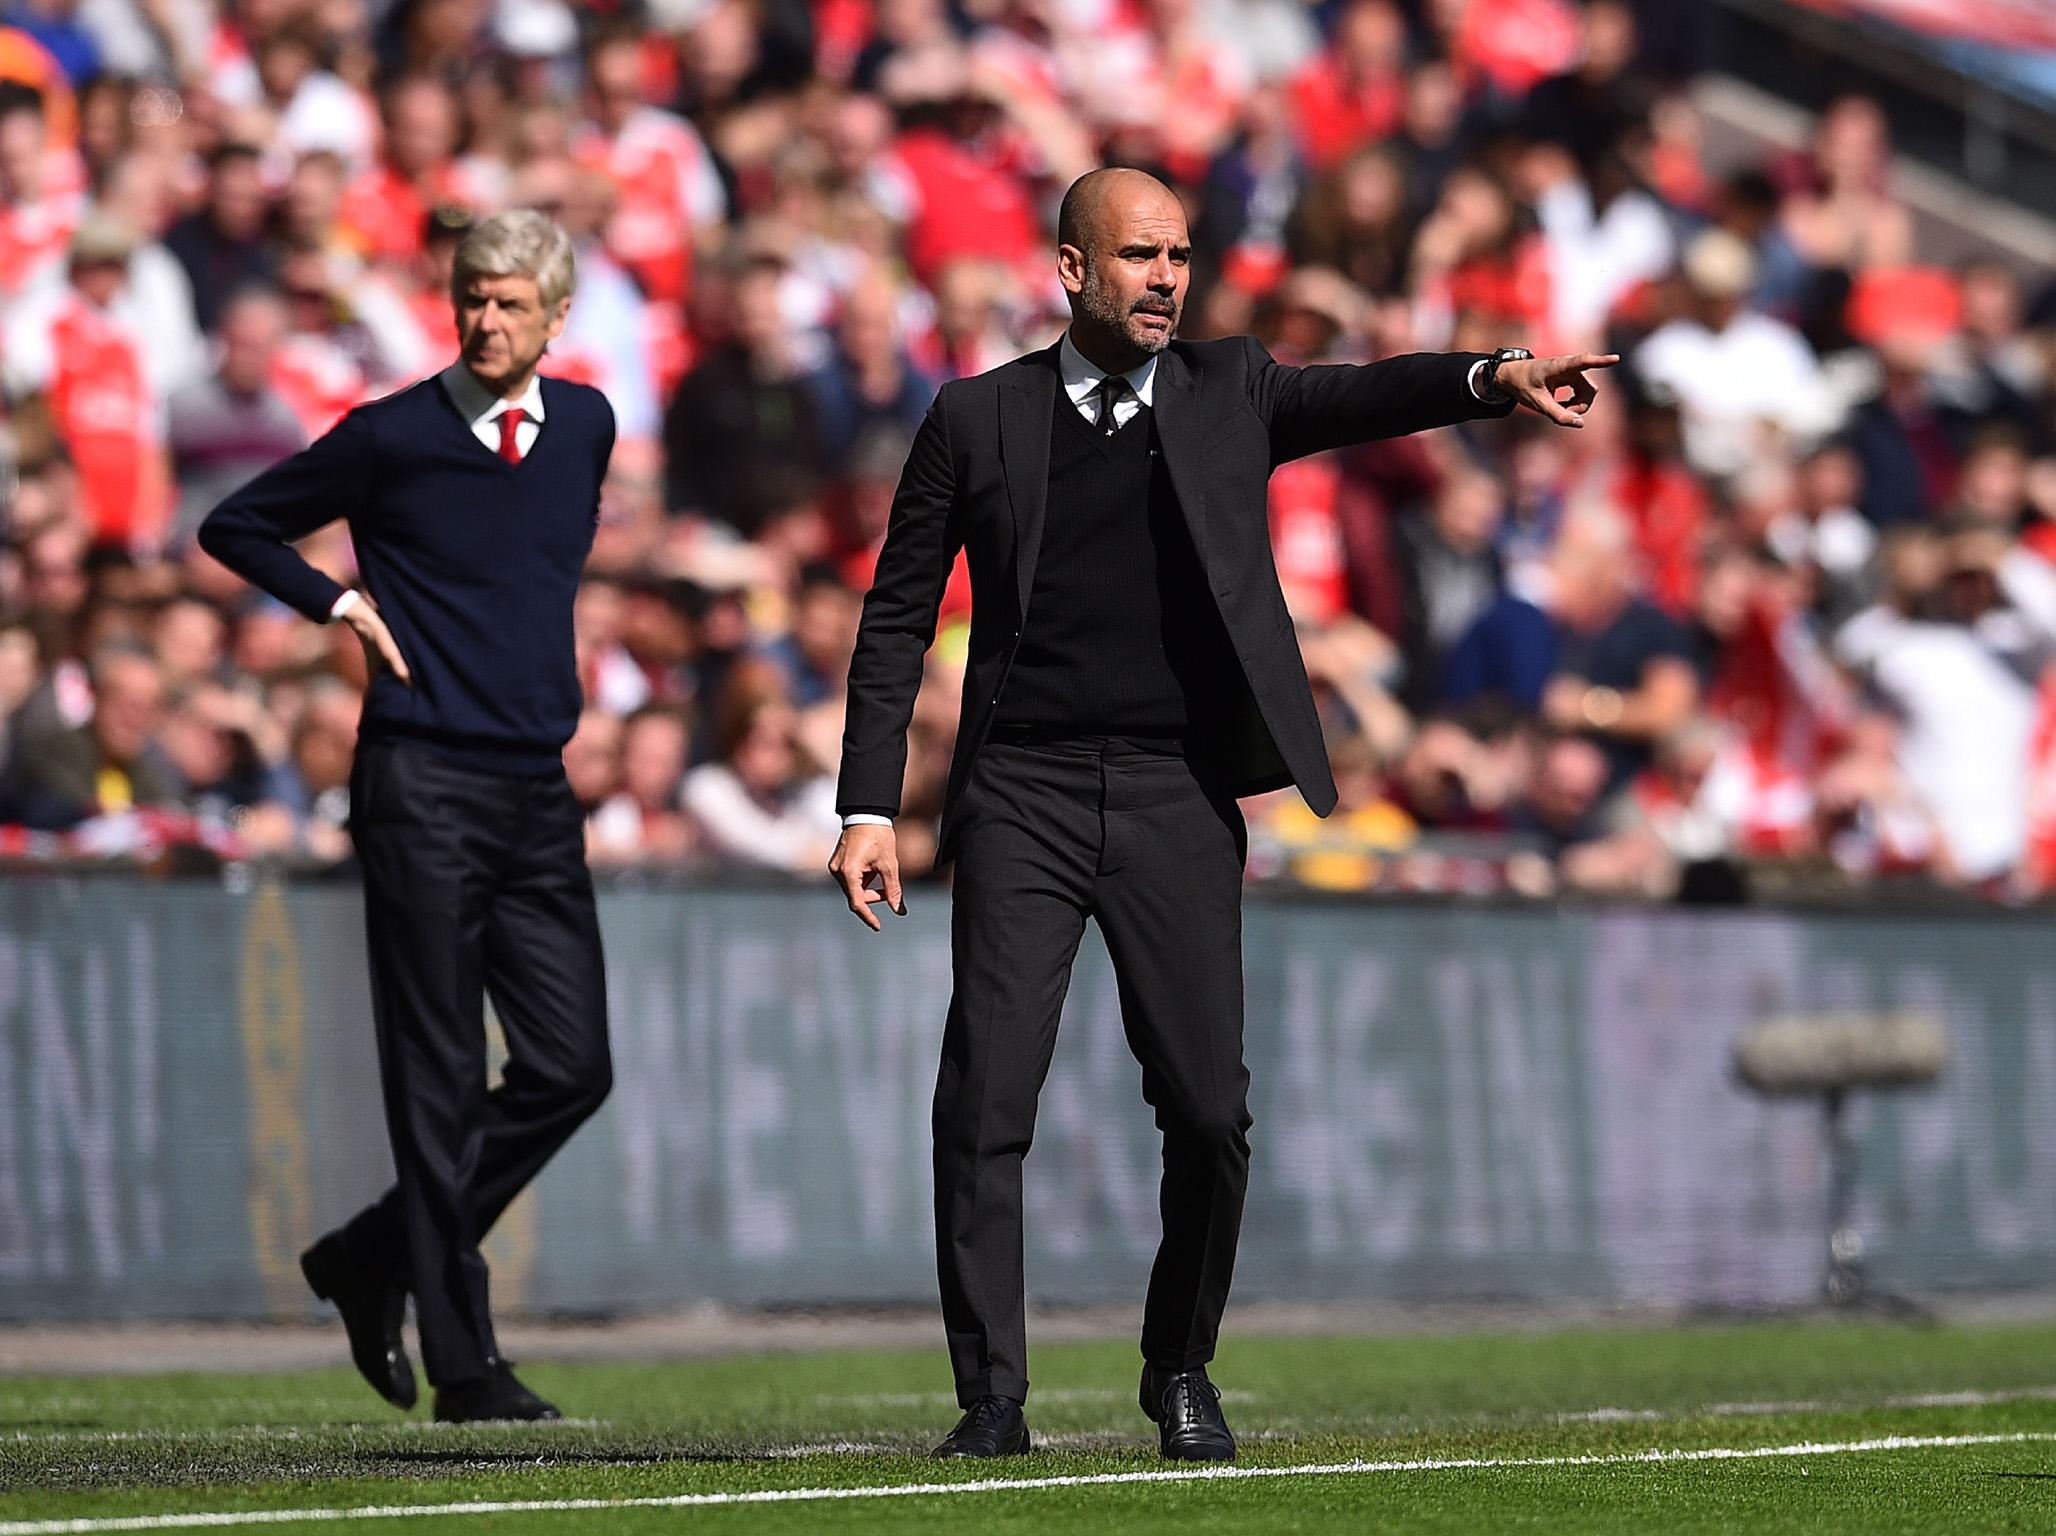 Arsene Wenger and Pep Guardiola will go head to head at Wembley